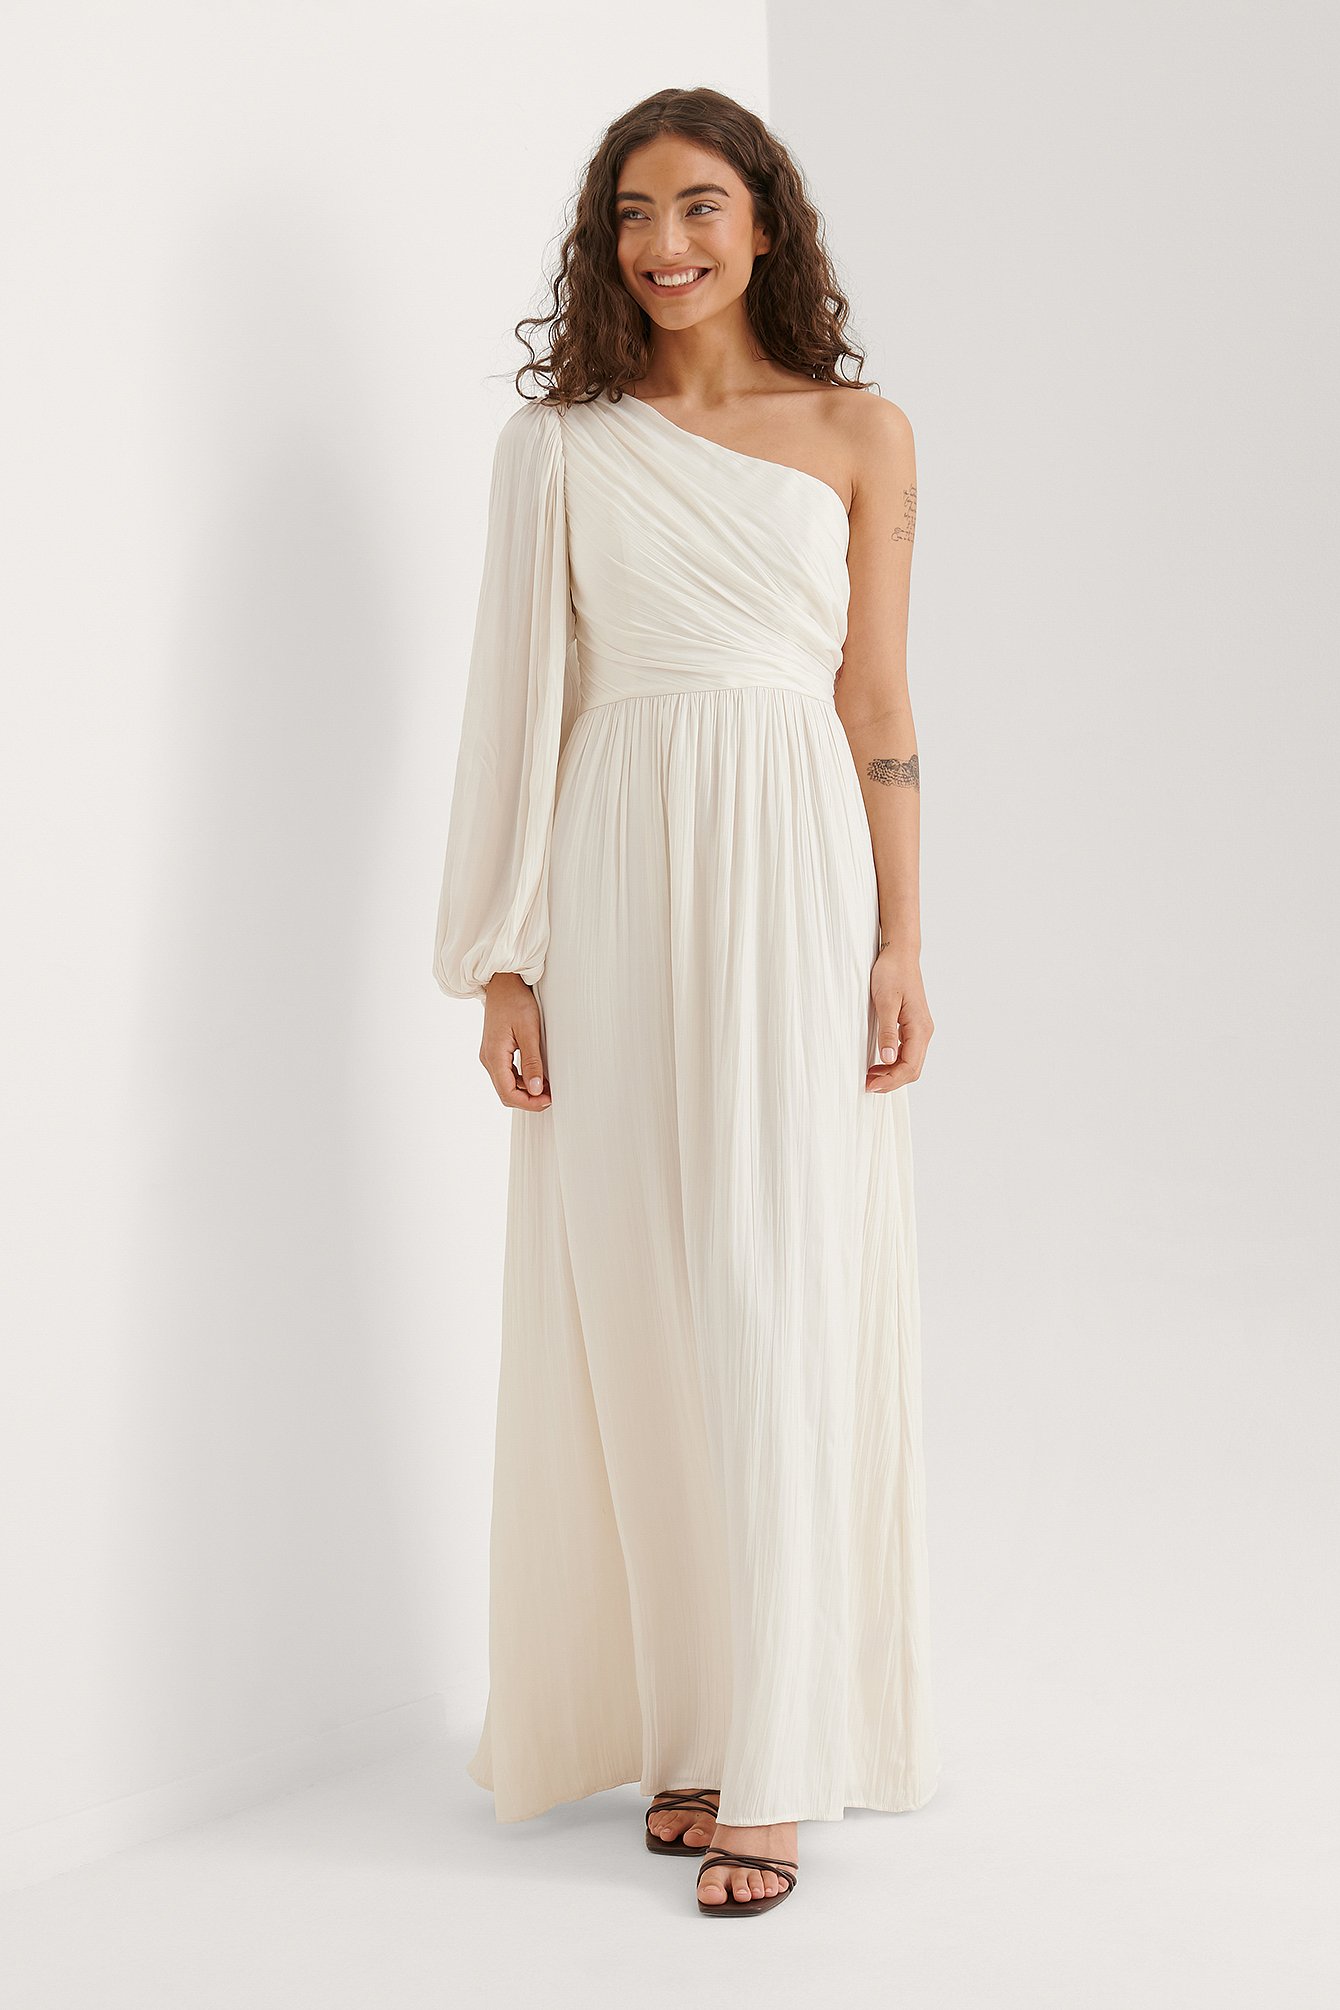 Balloon Sleeve Maxi Dress Outfit